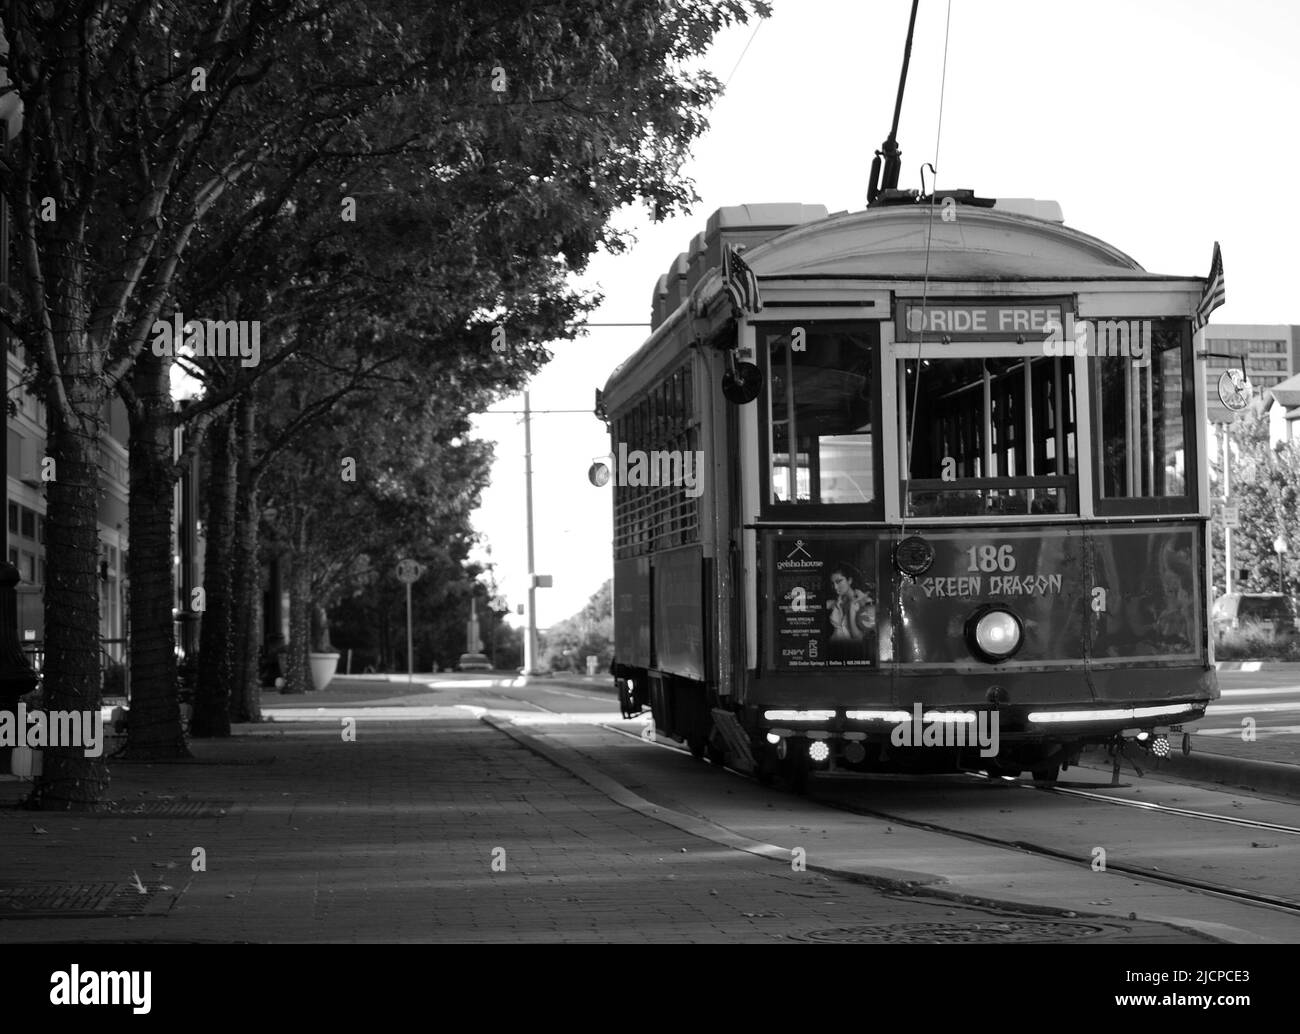 Trolley car in the Uptown area of Dallas Texas Stock Photo